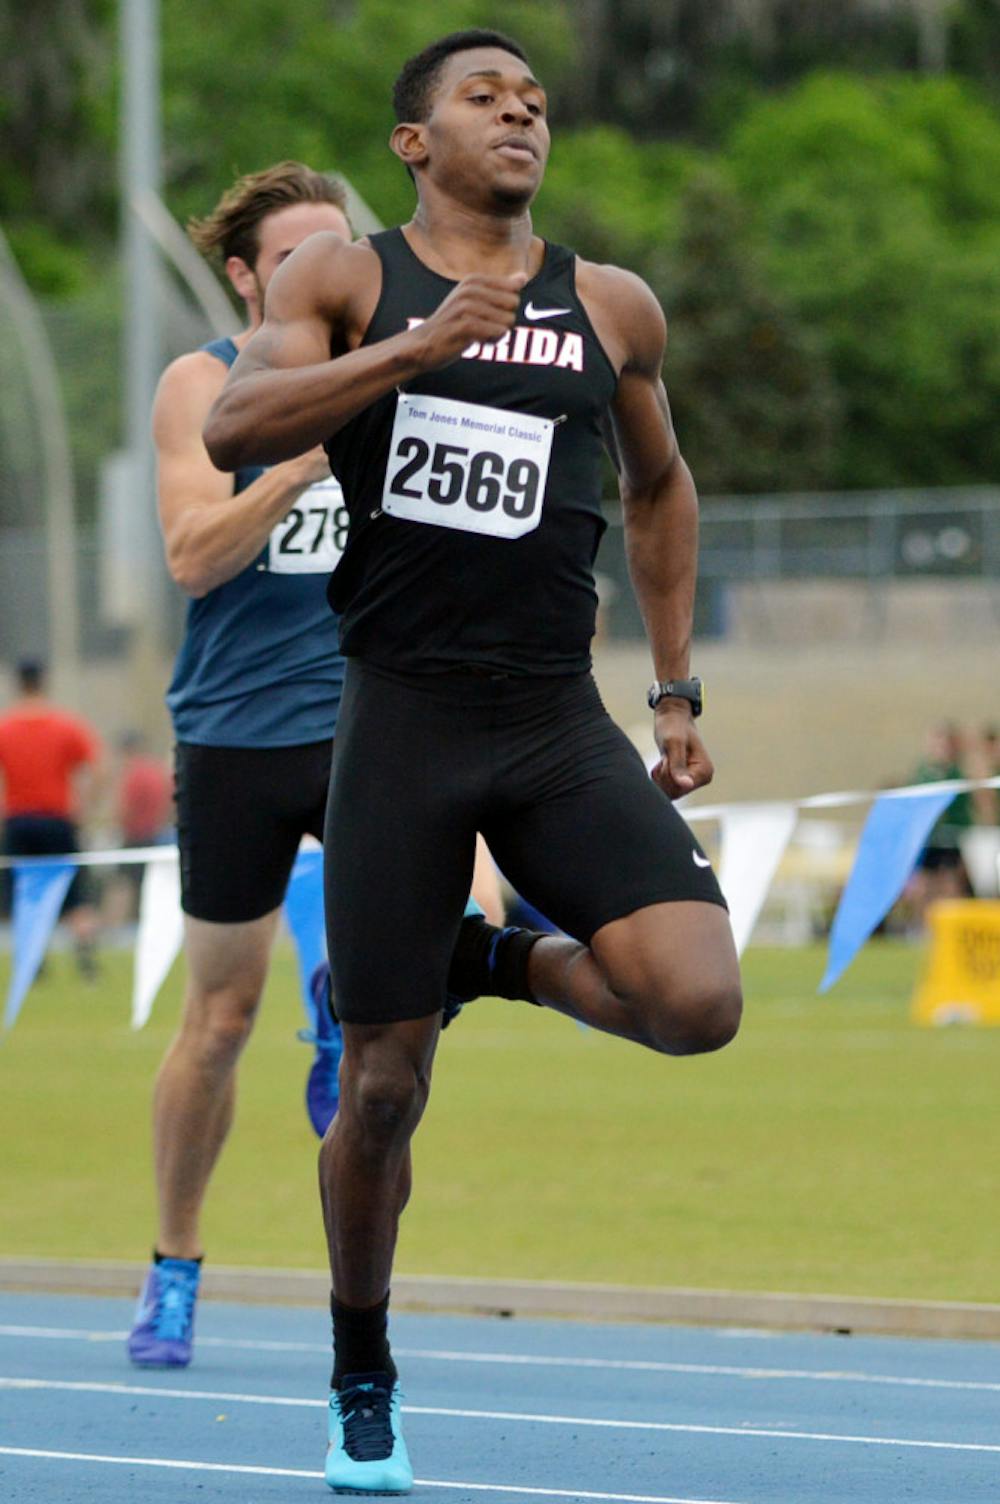 <p>Dedric Dukes races in the 400-meter dash at the Tom Jones Memorial on April 19 at the Percy Beard Track. Dukes set personal-best marks in every event he competed in during the 2014 season and help break the school's 4x400-meter relay record.</p>